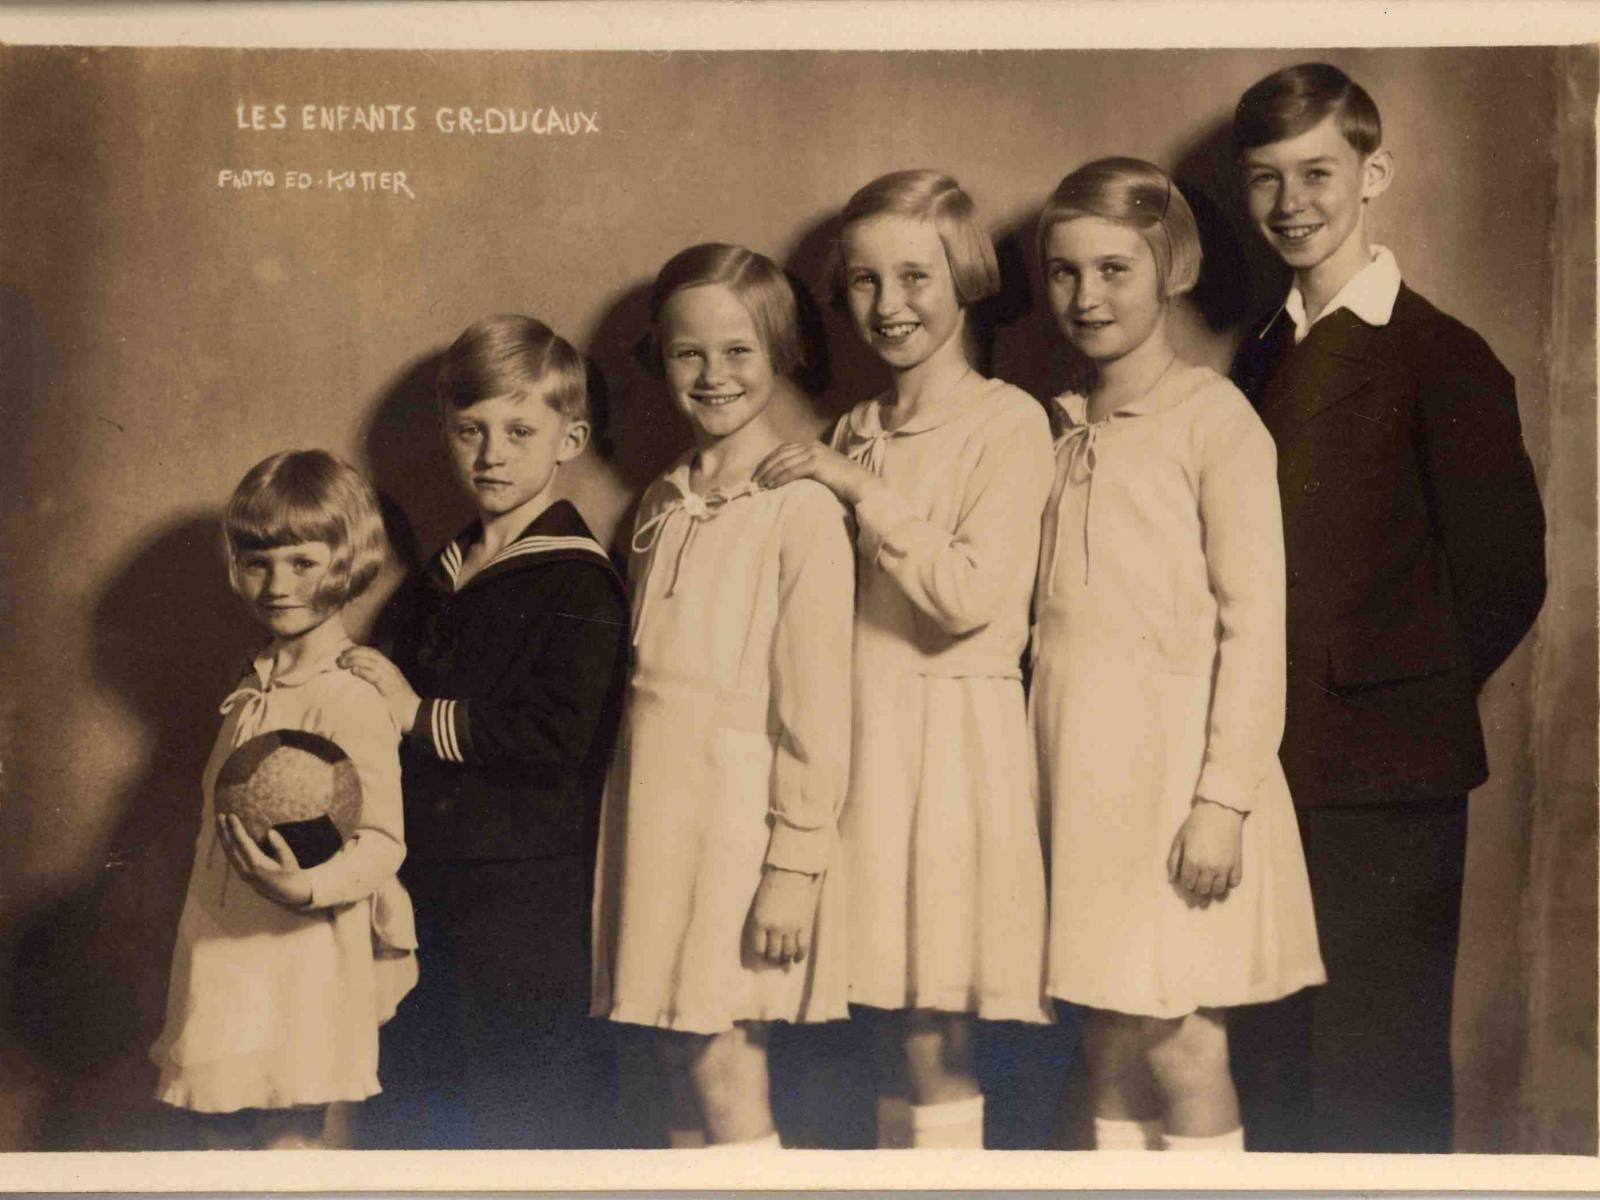 The Grand Ducal children in 1934